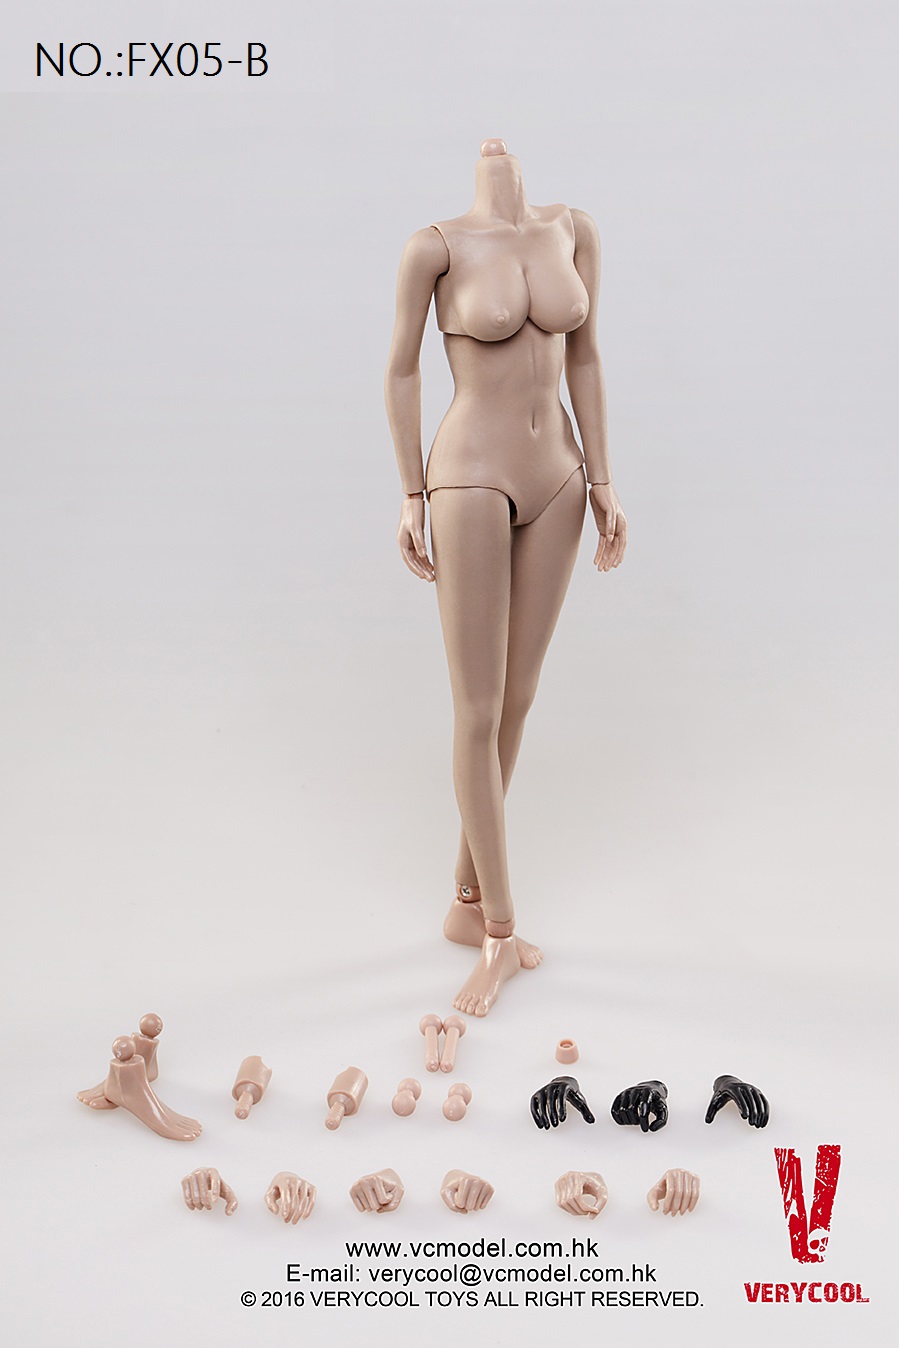 female - NEW PRODUCT: [head carving / body] VERYCOOL notice: 1/6 FX05 joint rubber female body COMING SOON 17190710